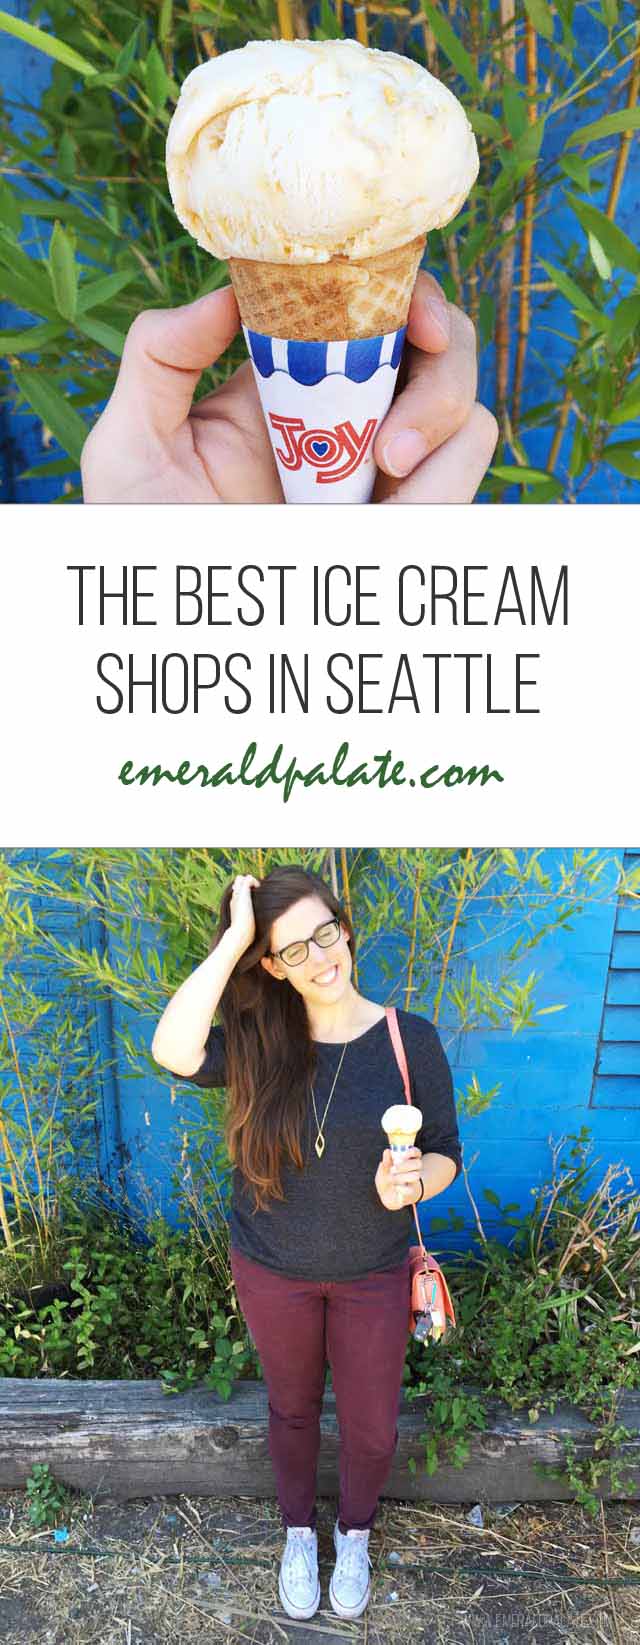 The best ice cream shops in Seattle. If you love ice cream, this outlines where to find the best ice cream in Seattle like a local.